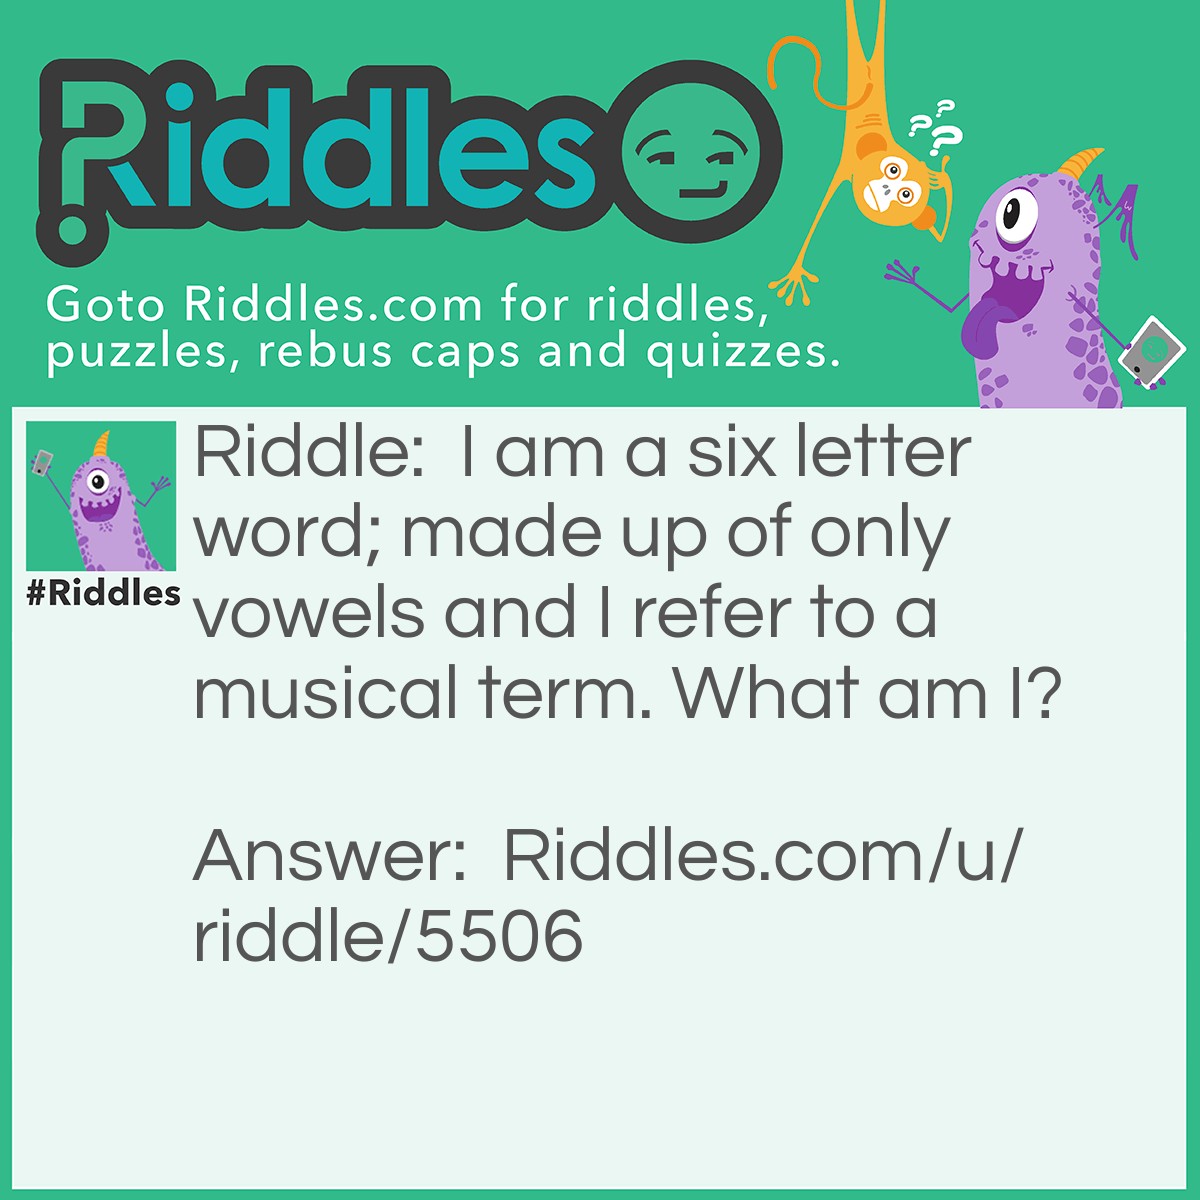 Riddle: I am a six letter word; made up of only vowels and I refer to a musical term. What am I? Answer: Euouae